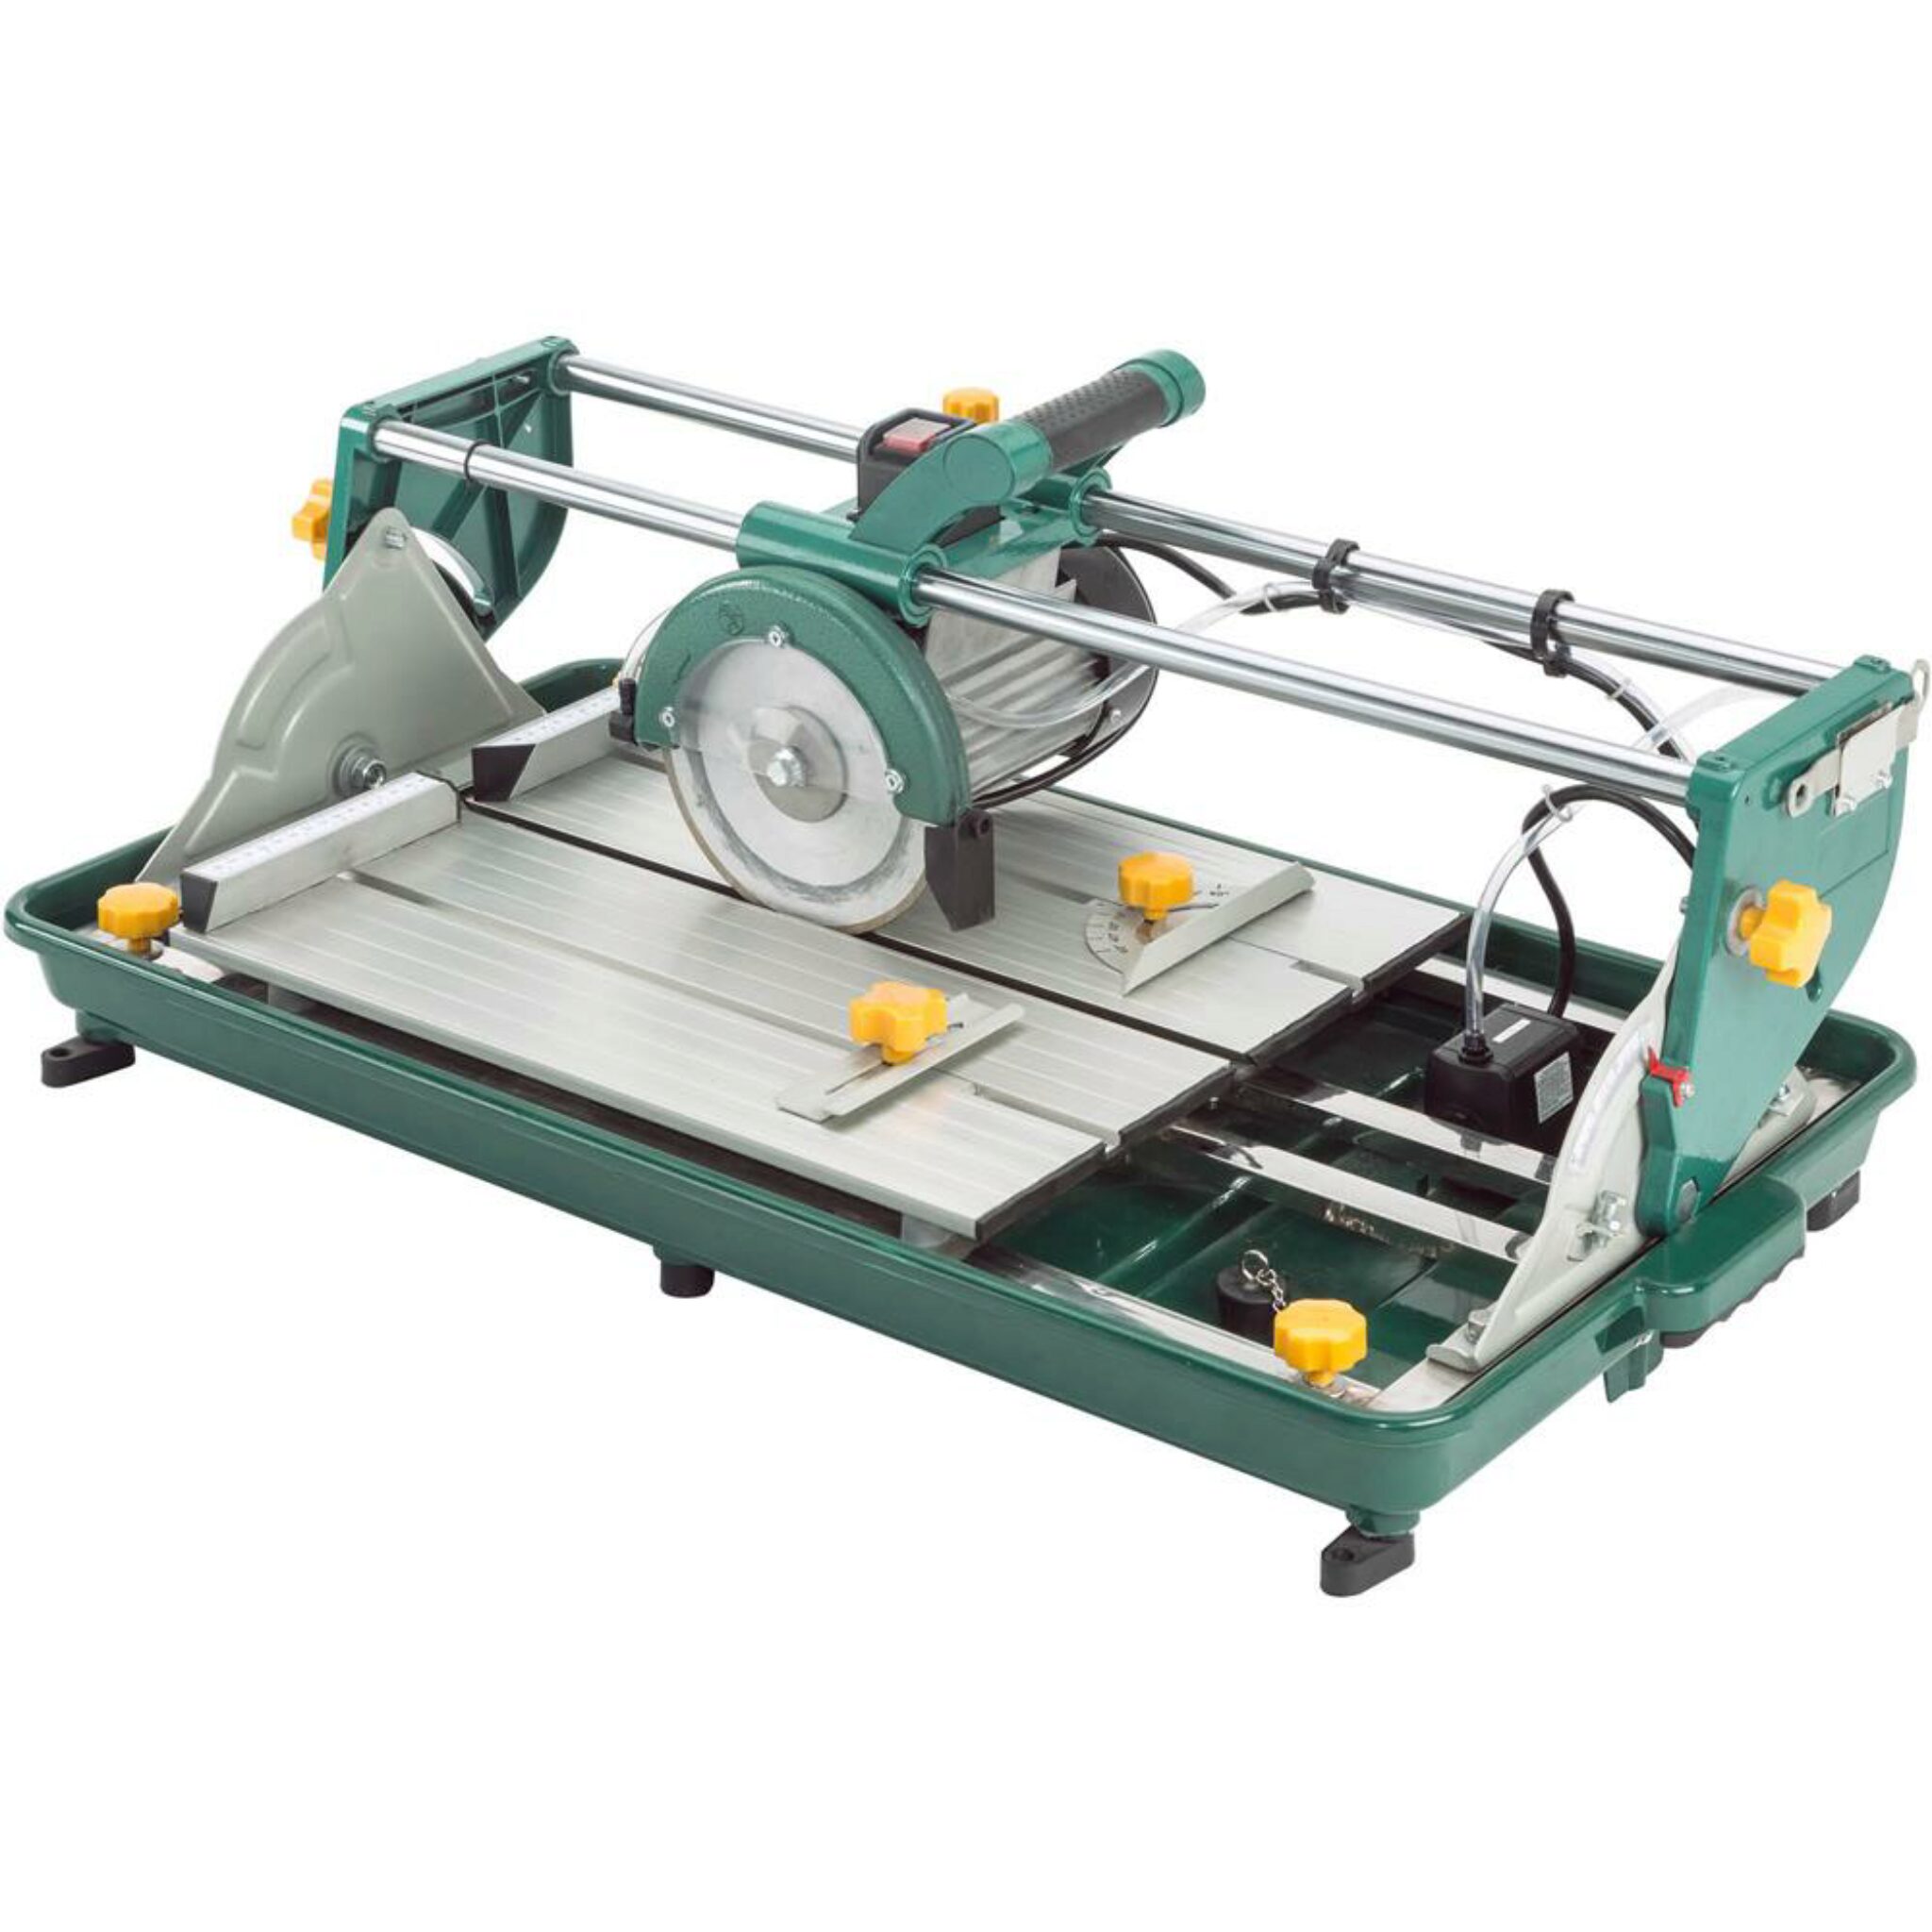 What Is The Difference Between Bridge Tile Saw And Sliding Table